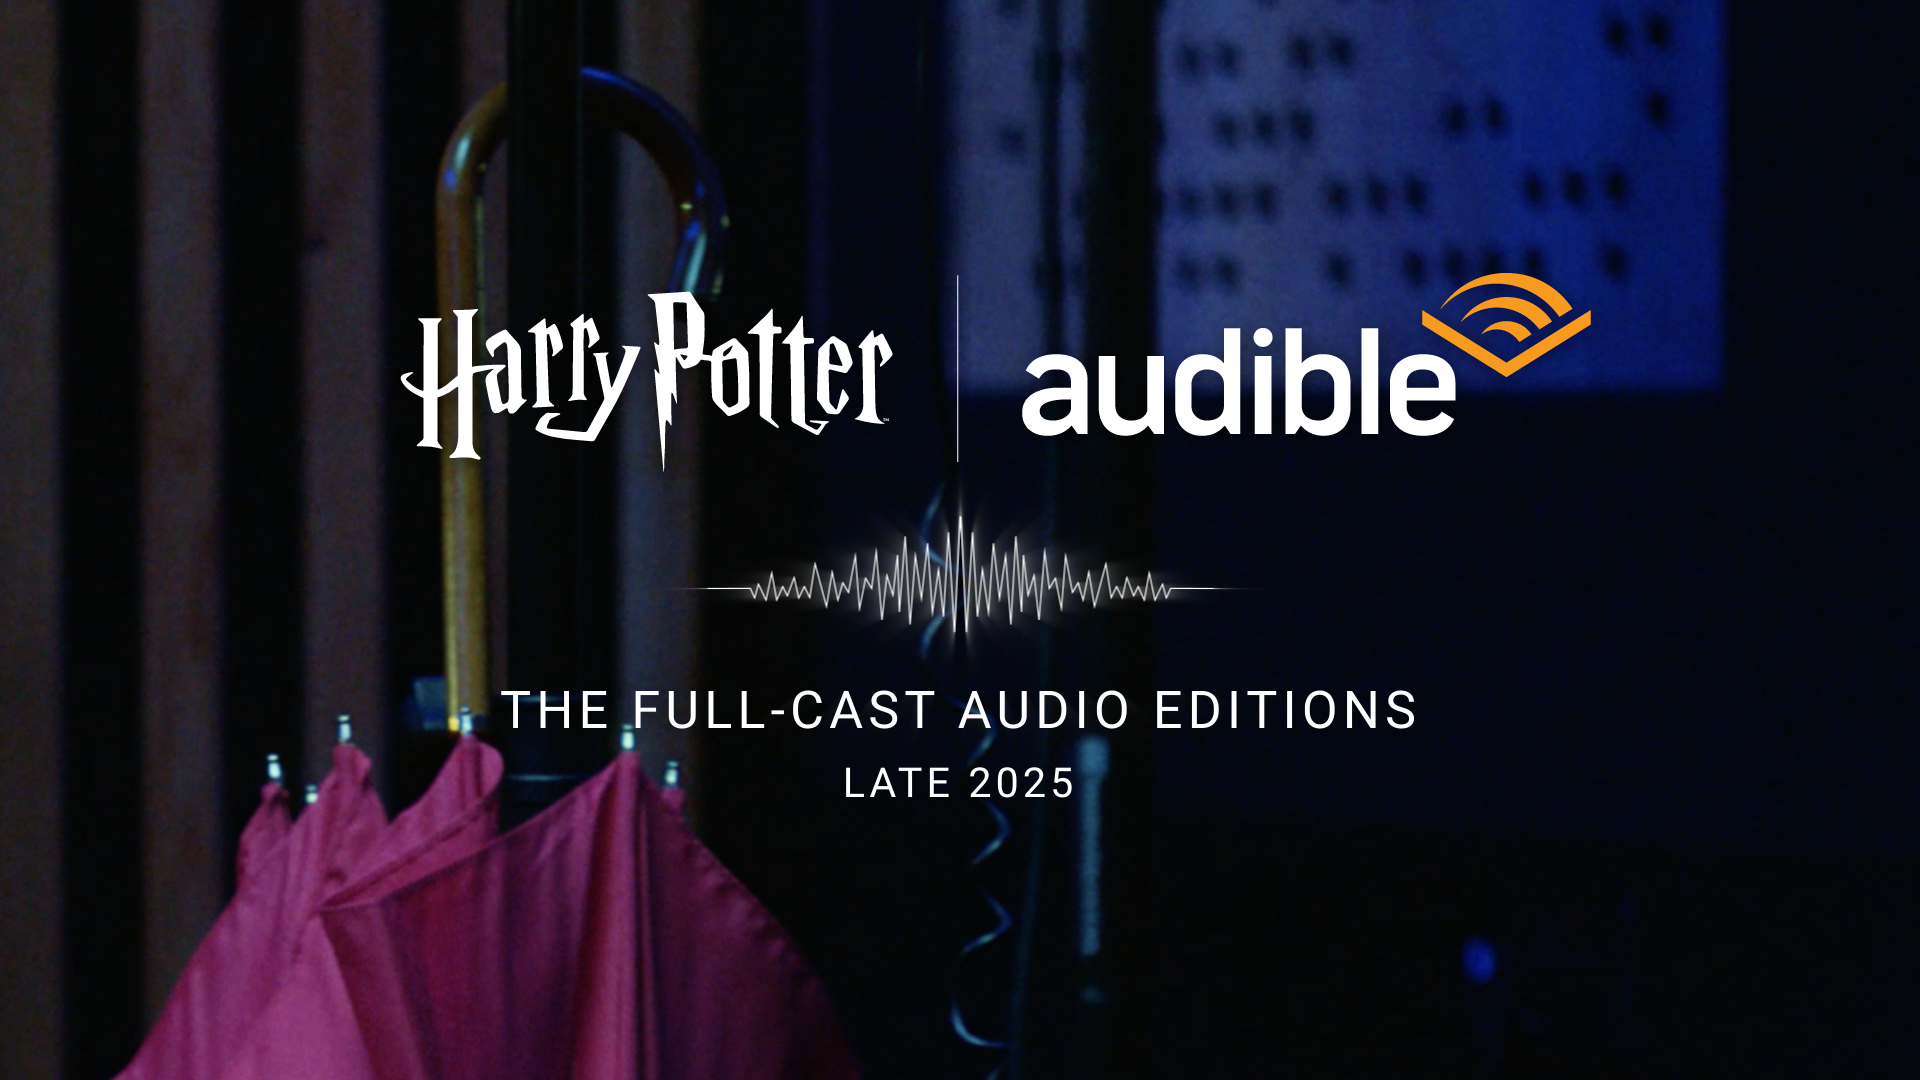 All seven Harry Potter audiobooks to be transformed into new full-cast audio editions!